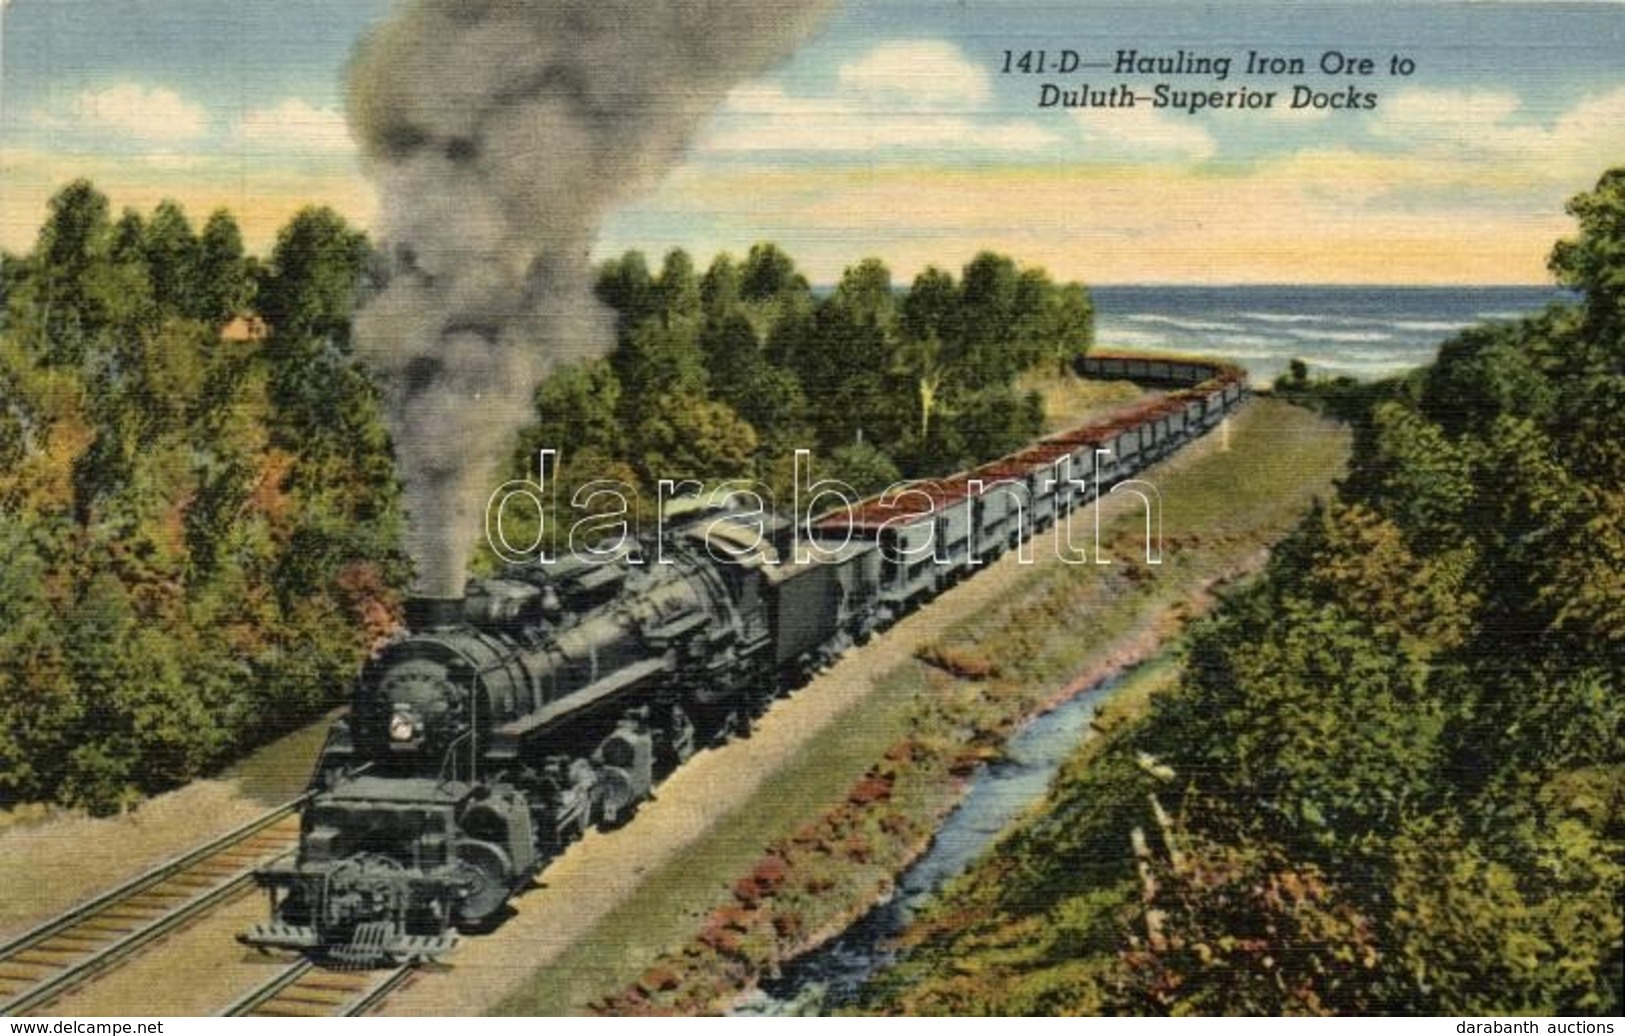 T2 Hauling Iron Ore To Duluth-Superior Docks, Locomotive - Unclassified